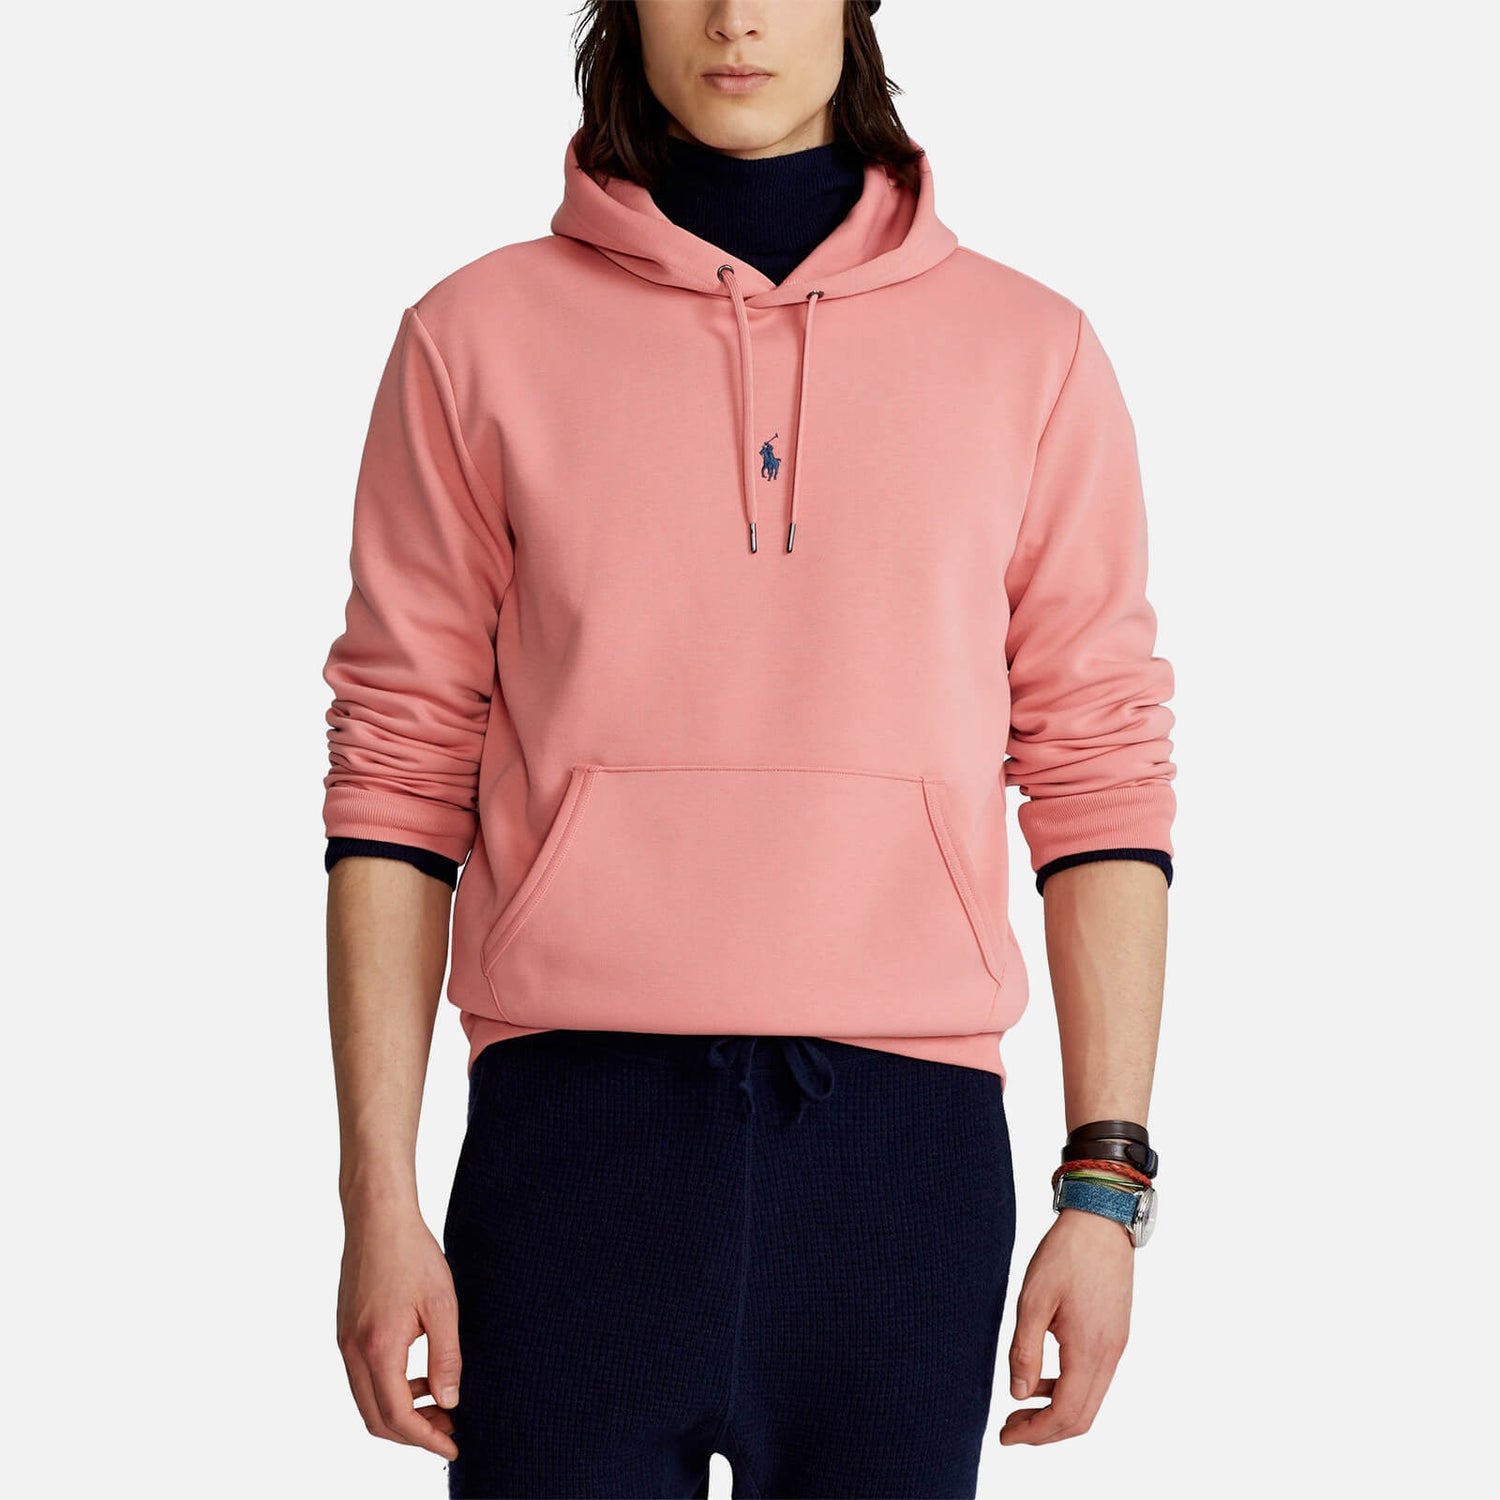 Polo Ralph Lauren Men's Double Knitted Centre Polo Player Hoodie - Dusty Rose - L